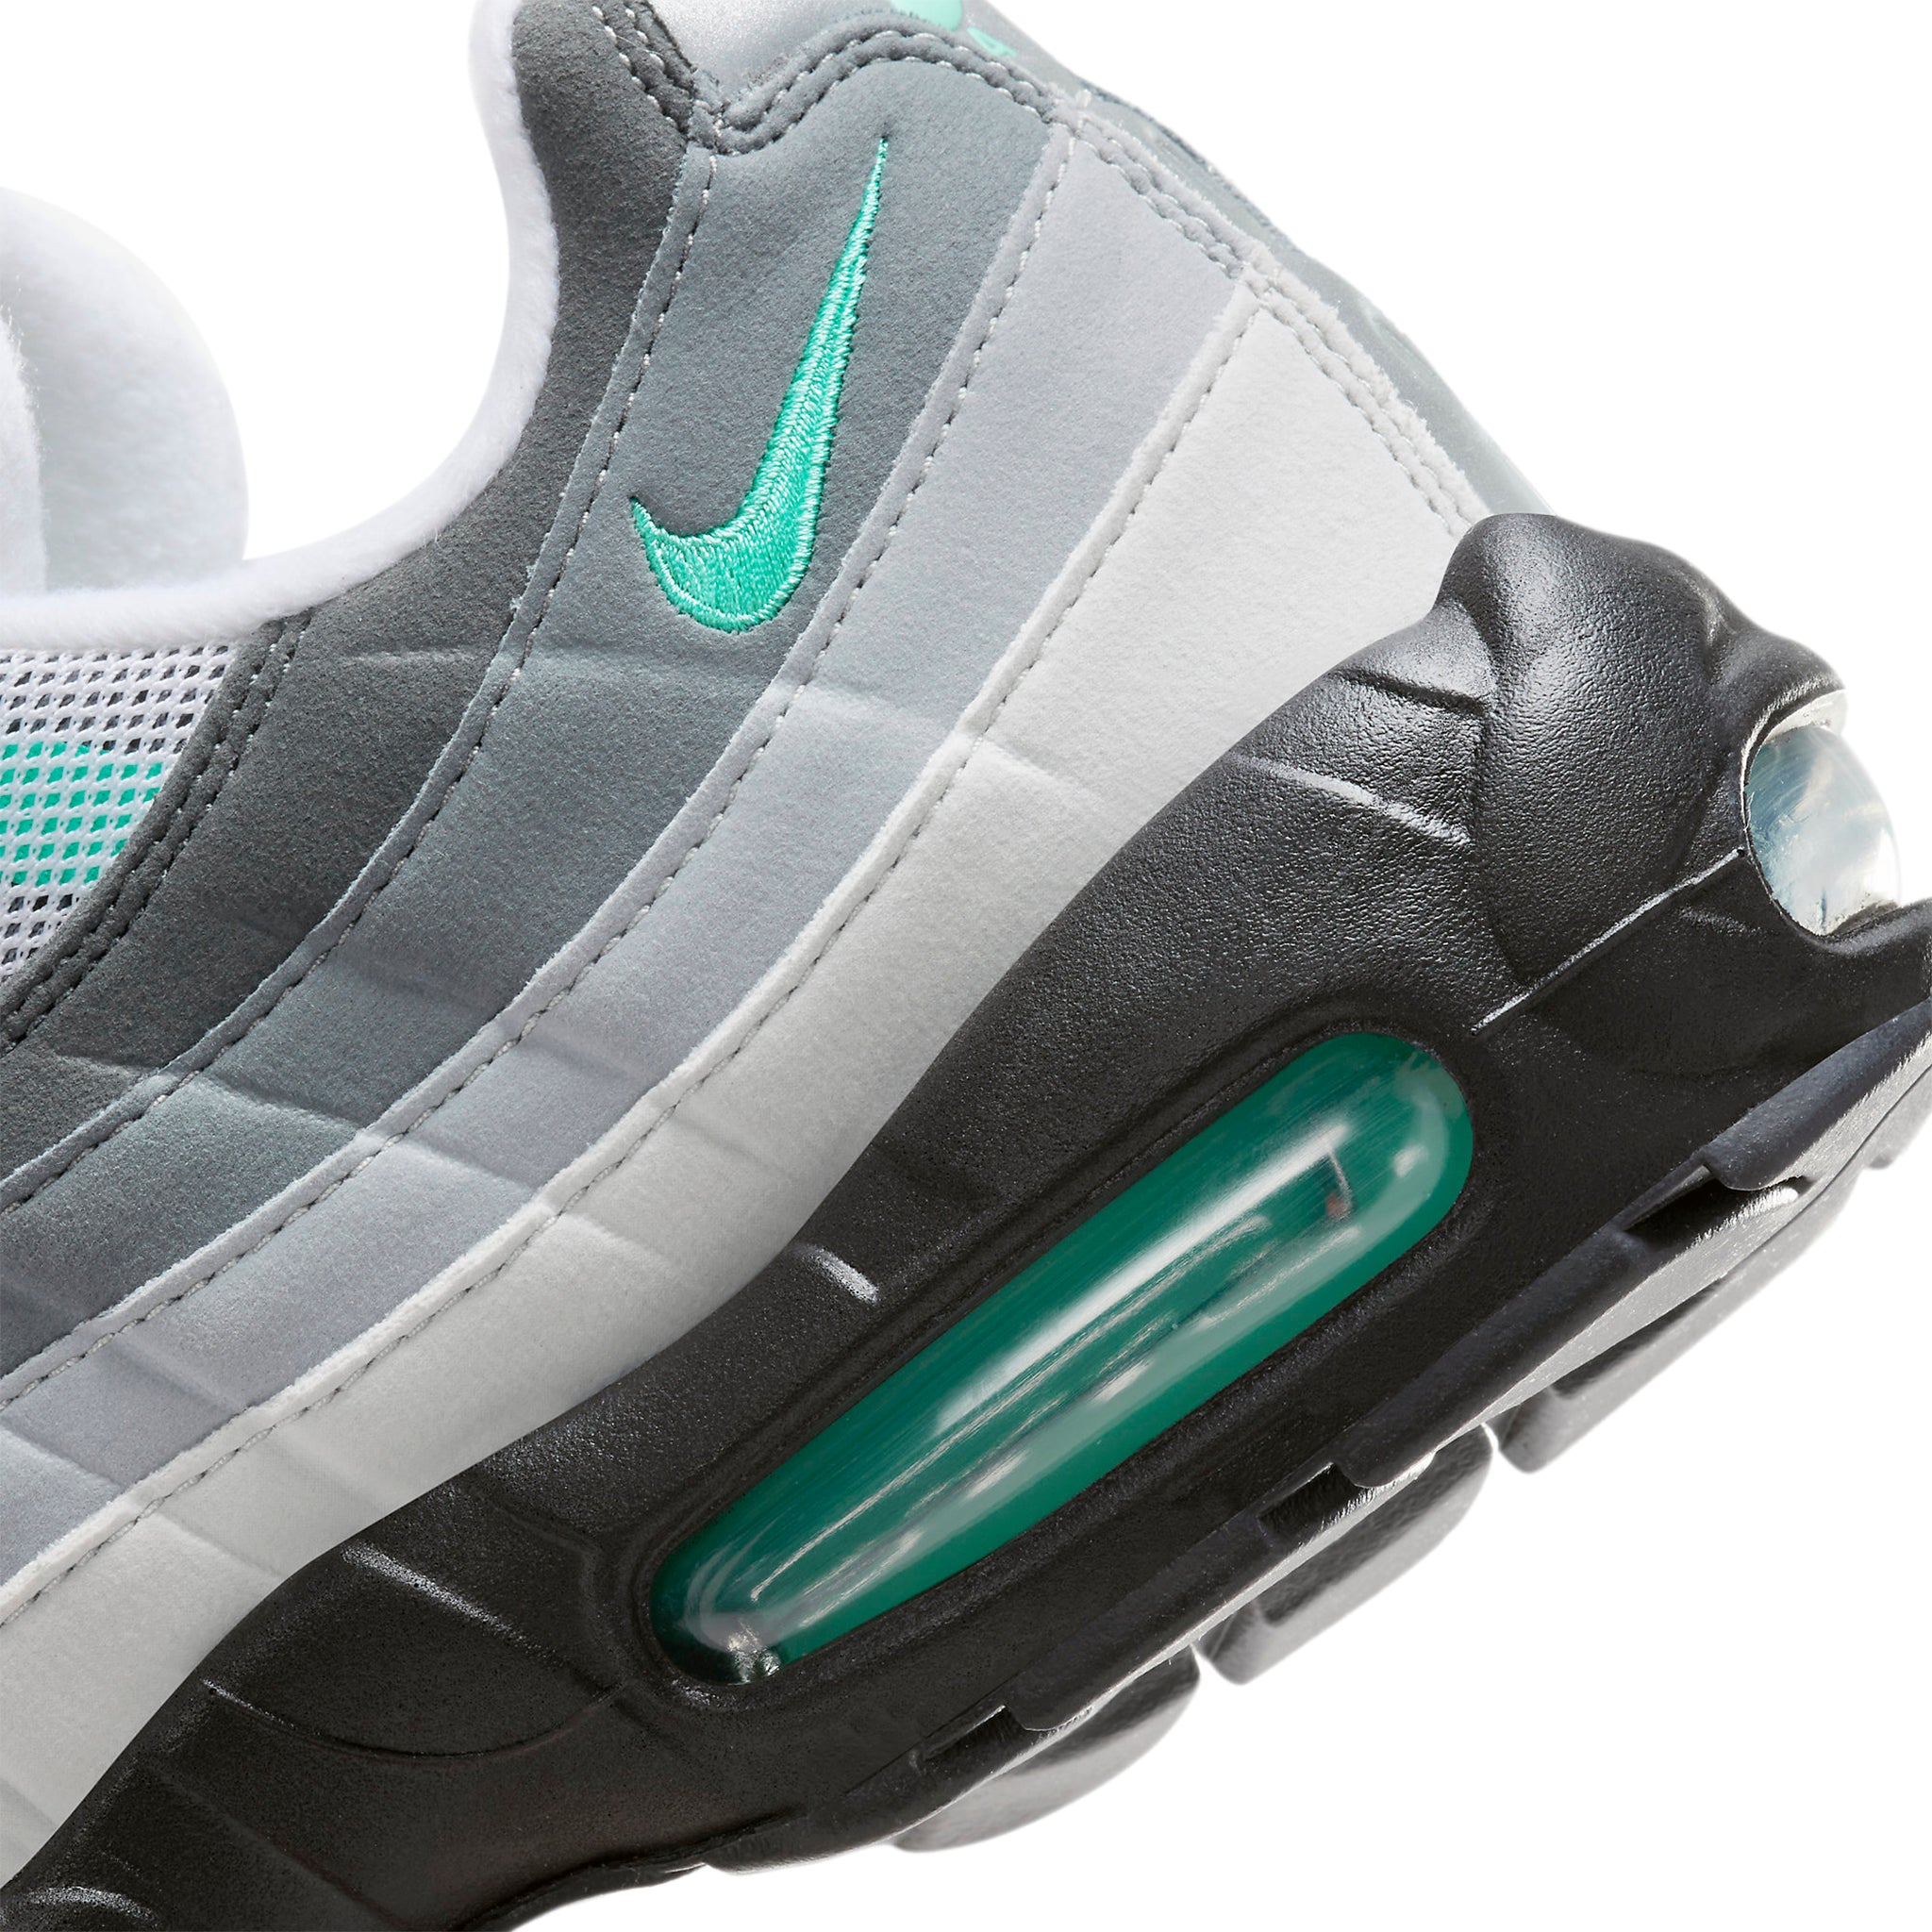 Heel view of Nike Air Max 95 Hyper Turquoise FV4710-100